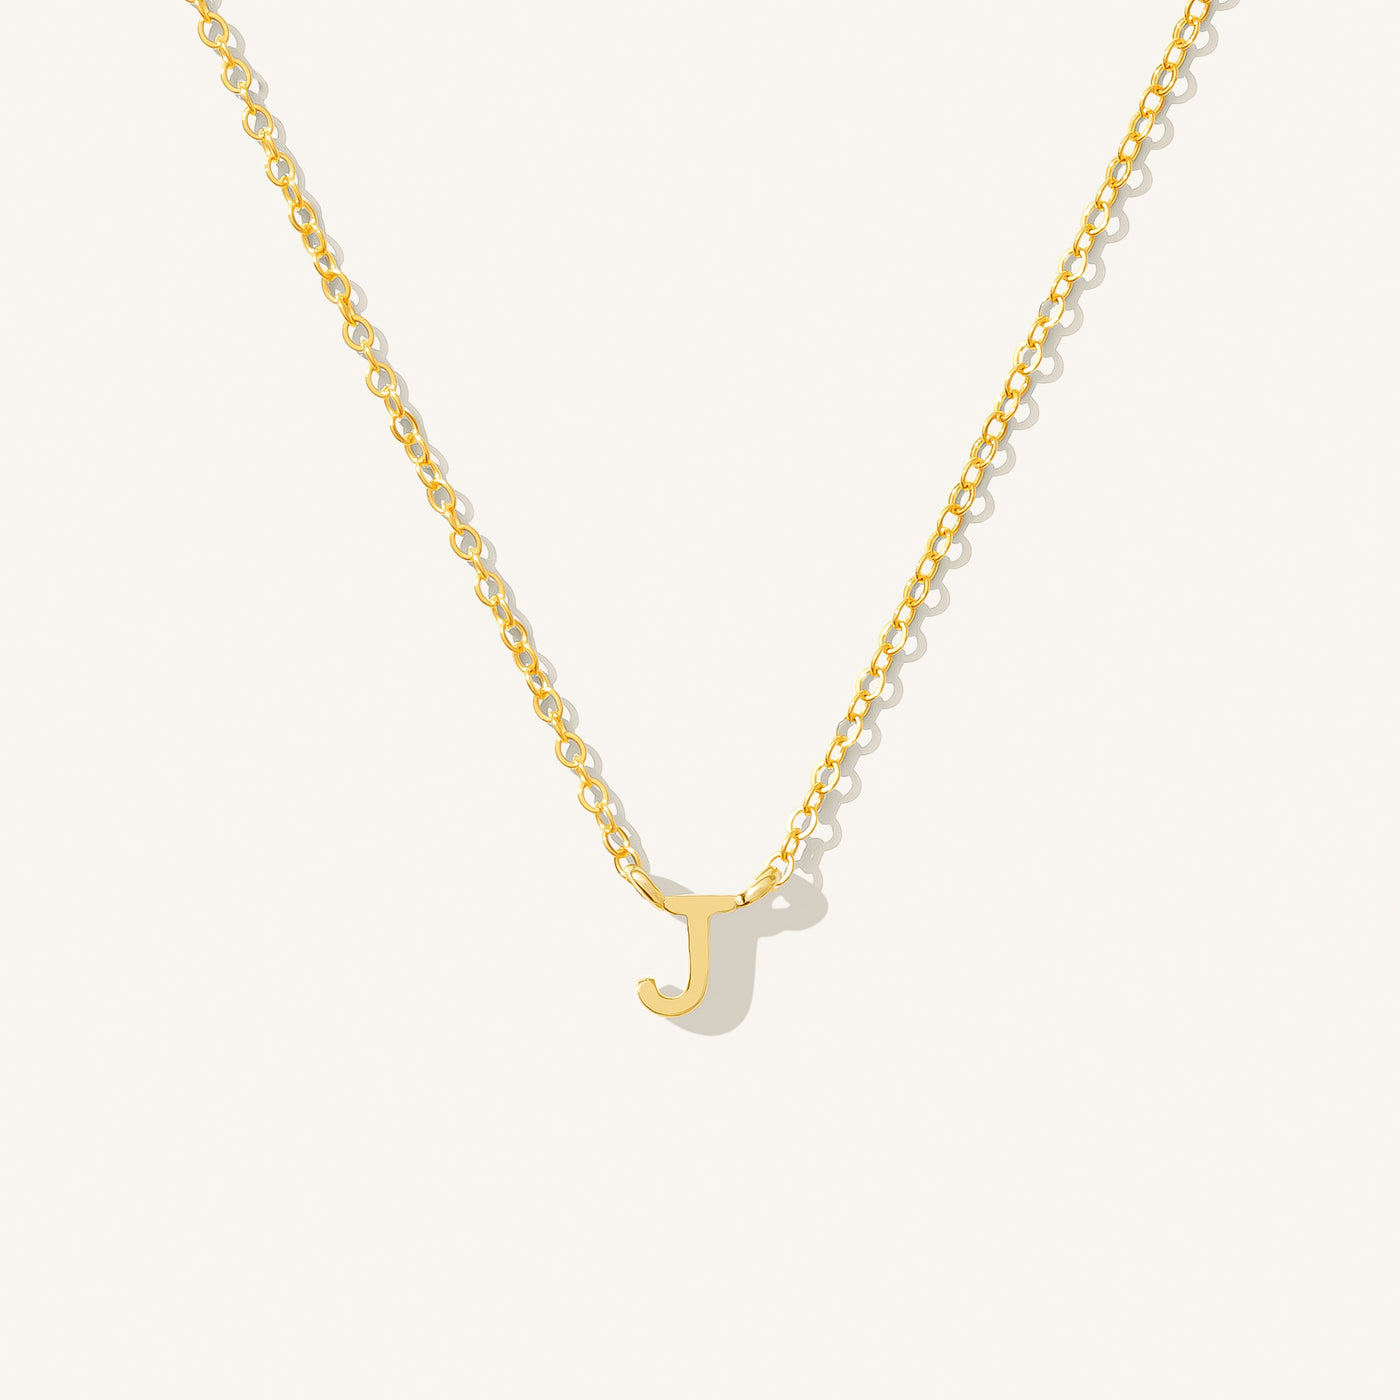 J Tiny Initial Necklace